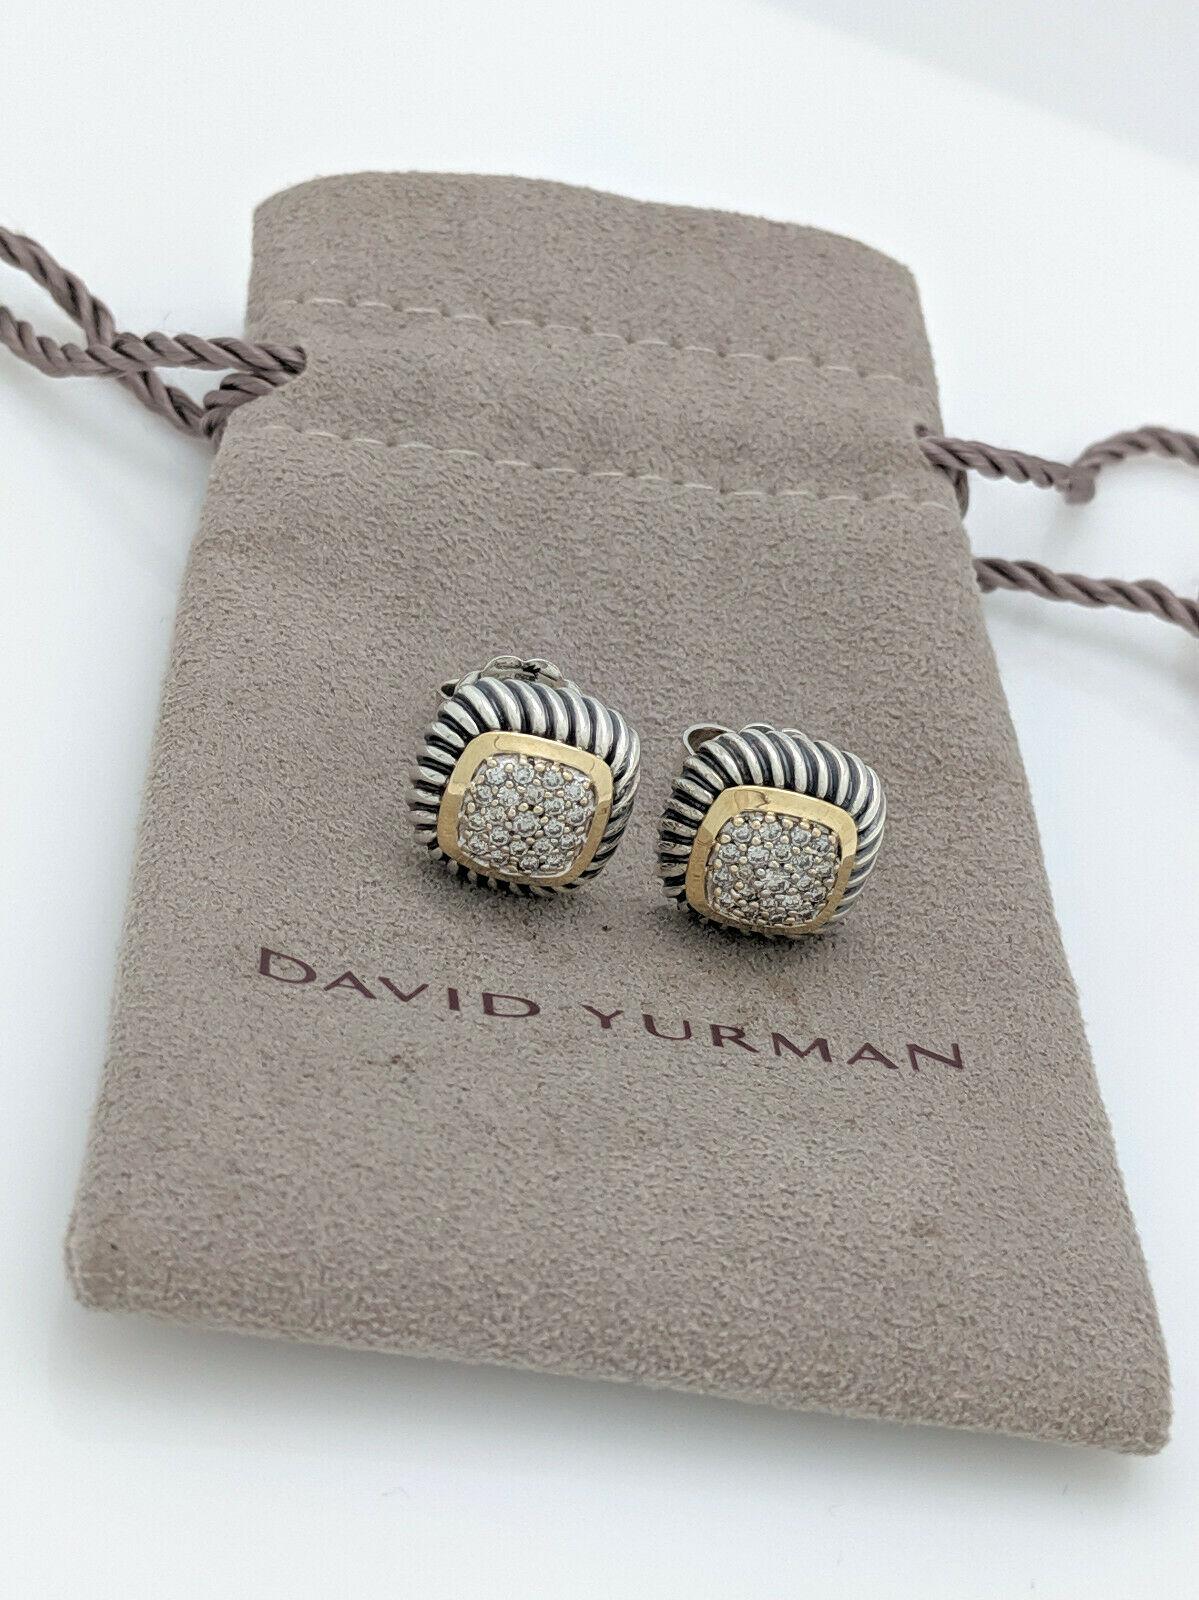 You are viewing a pair of David Yurman Diamond & Gold Albion Stud Earrings.
These earrings are crafted from 18k yellow gold and Sterling Silver, they weigh 8.3 grams. They measure 1/2